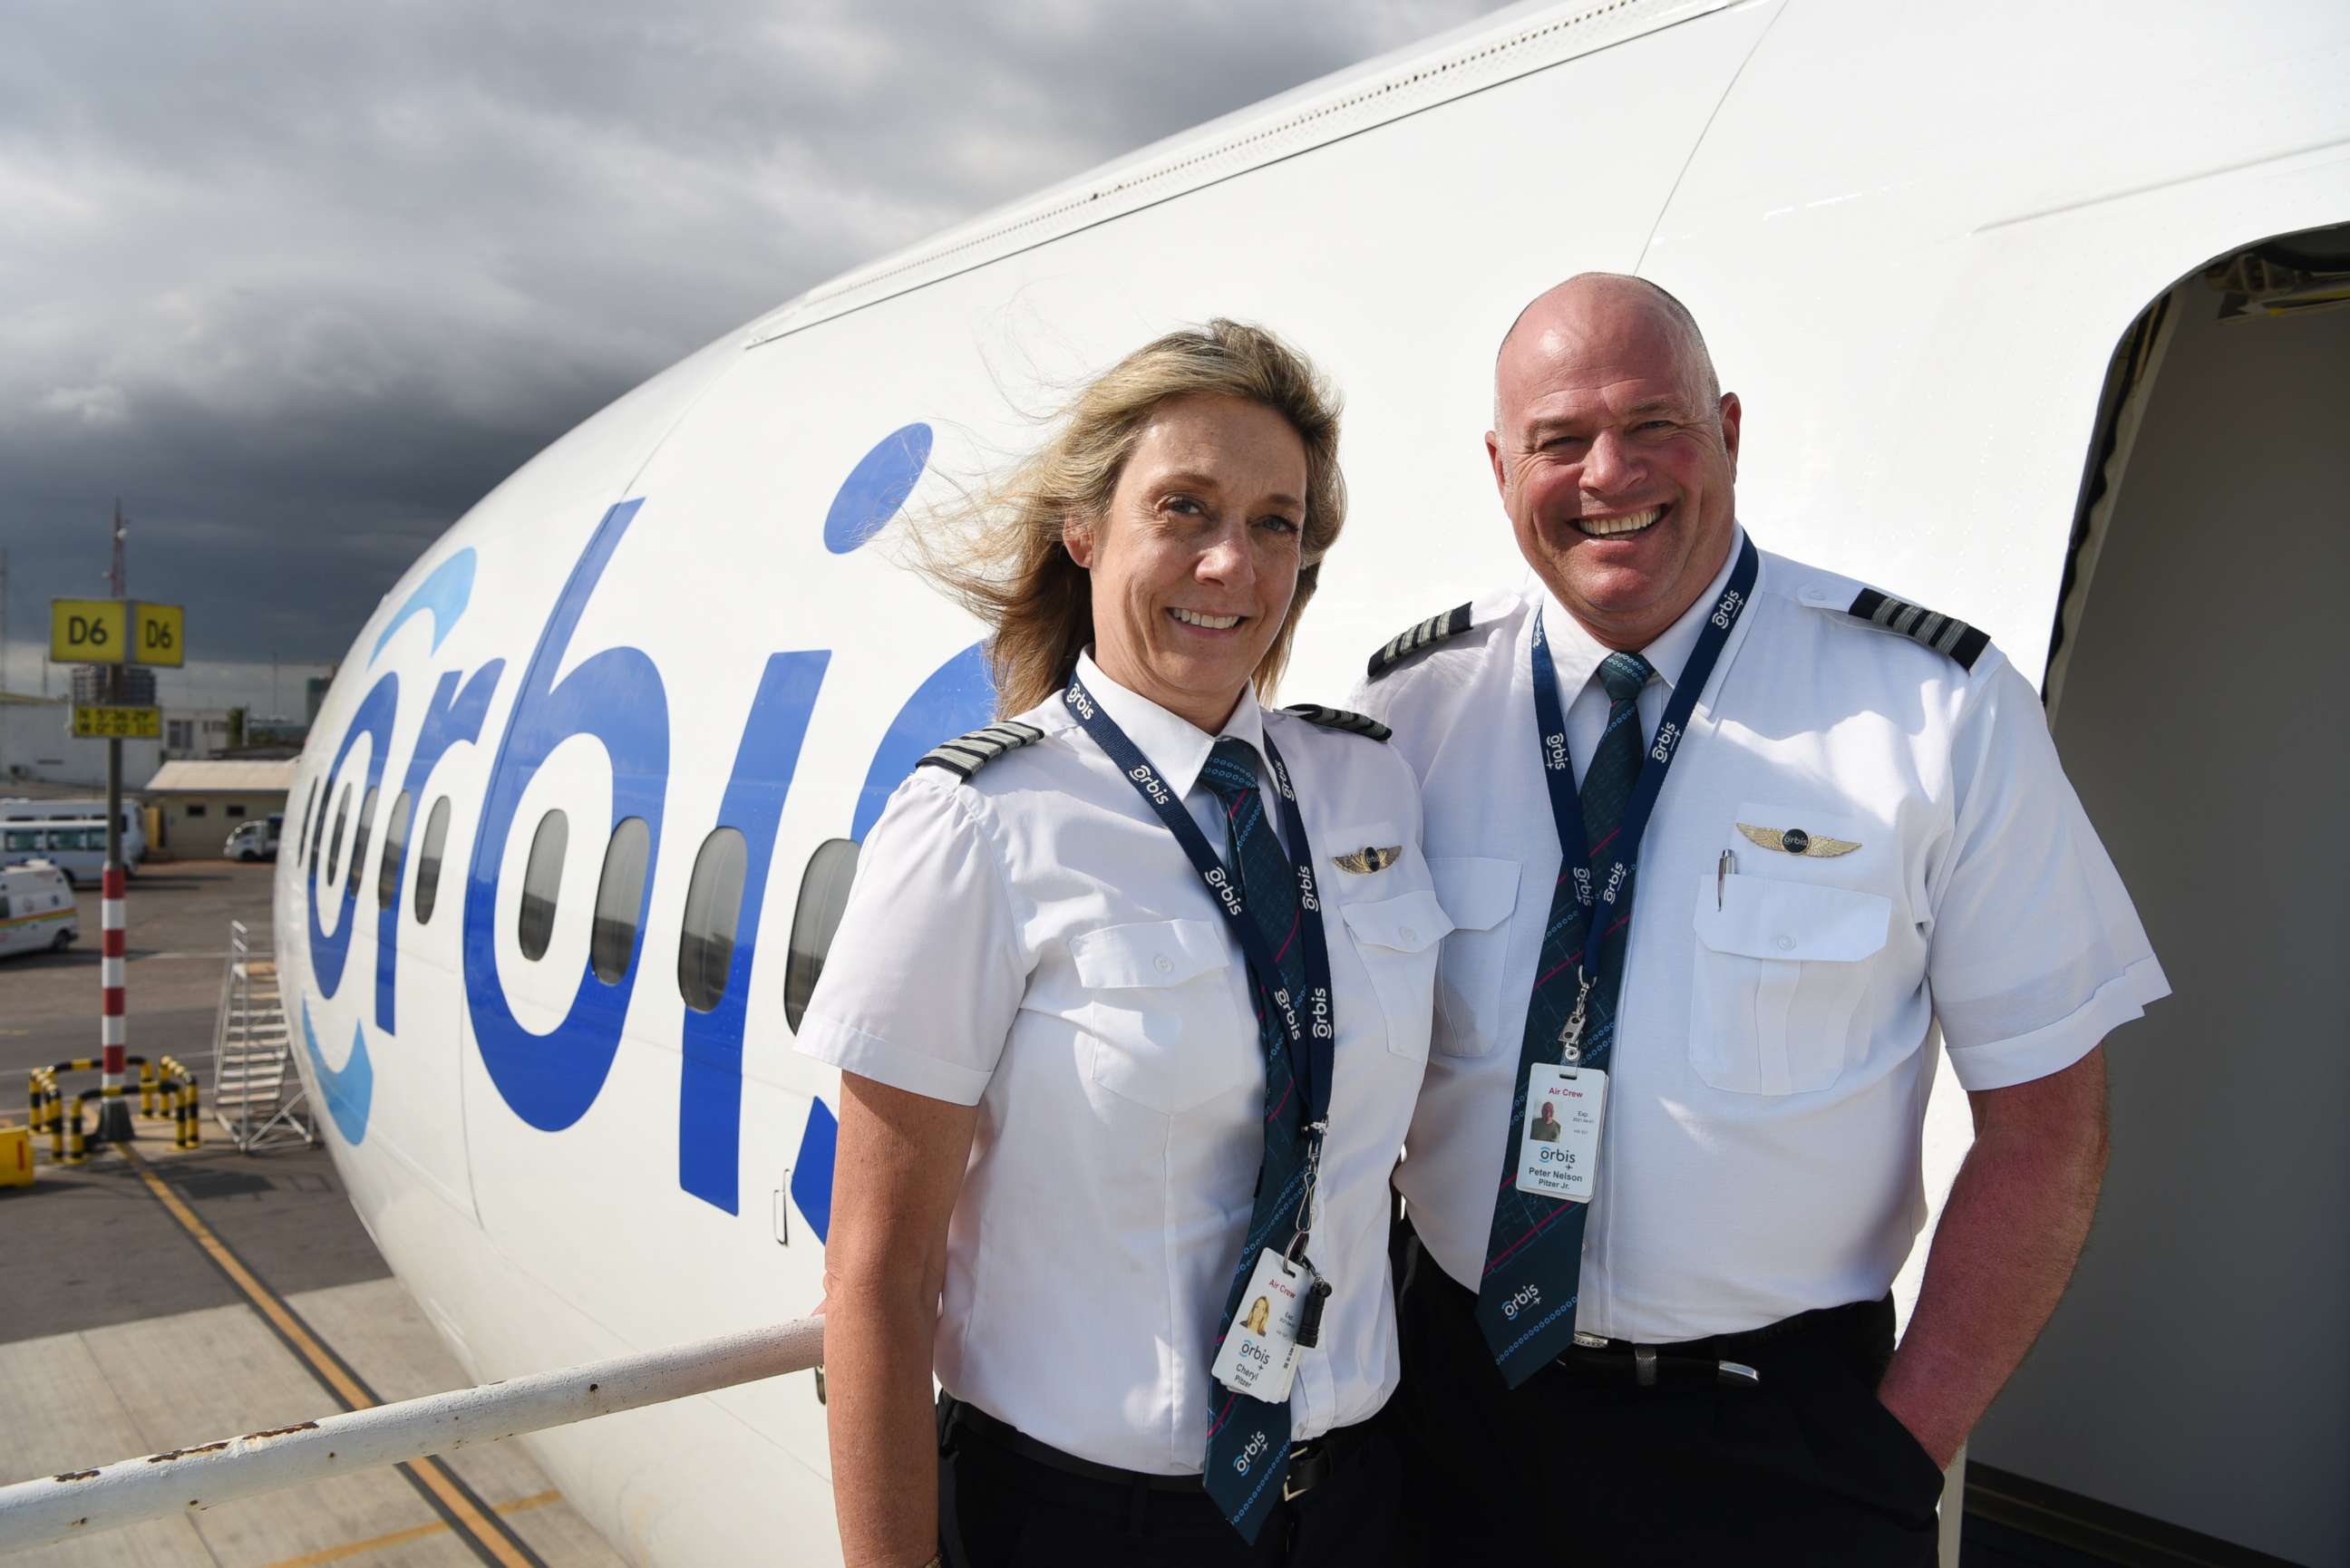 PHOTO: Peter and Cheryl Pitzer pose together outside an Orbis plane.